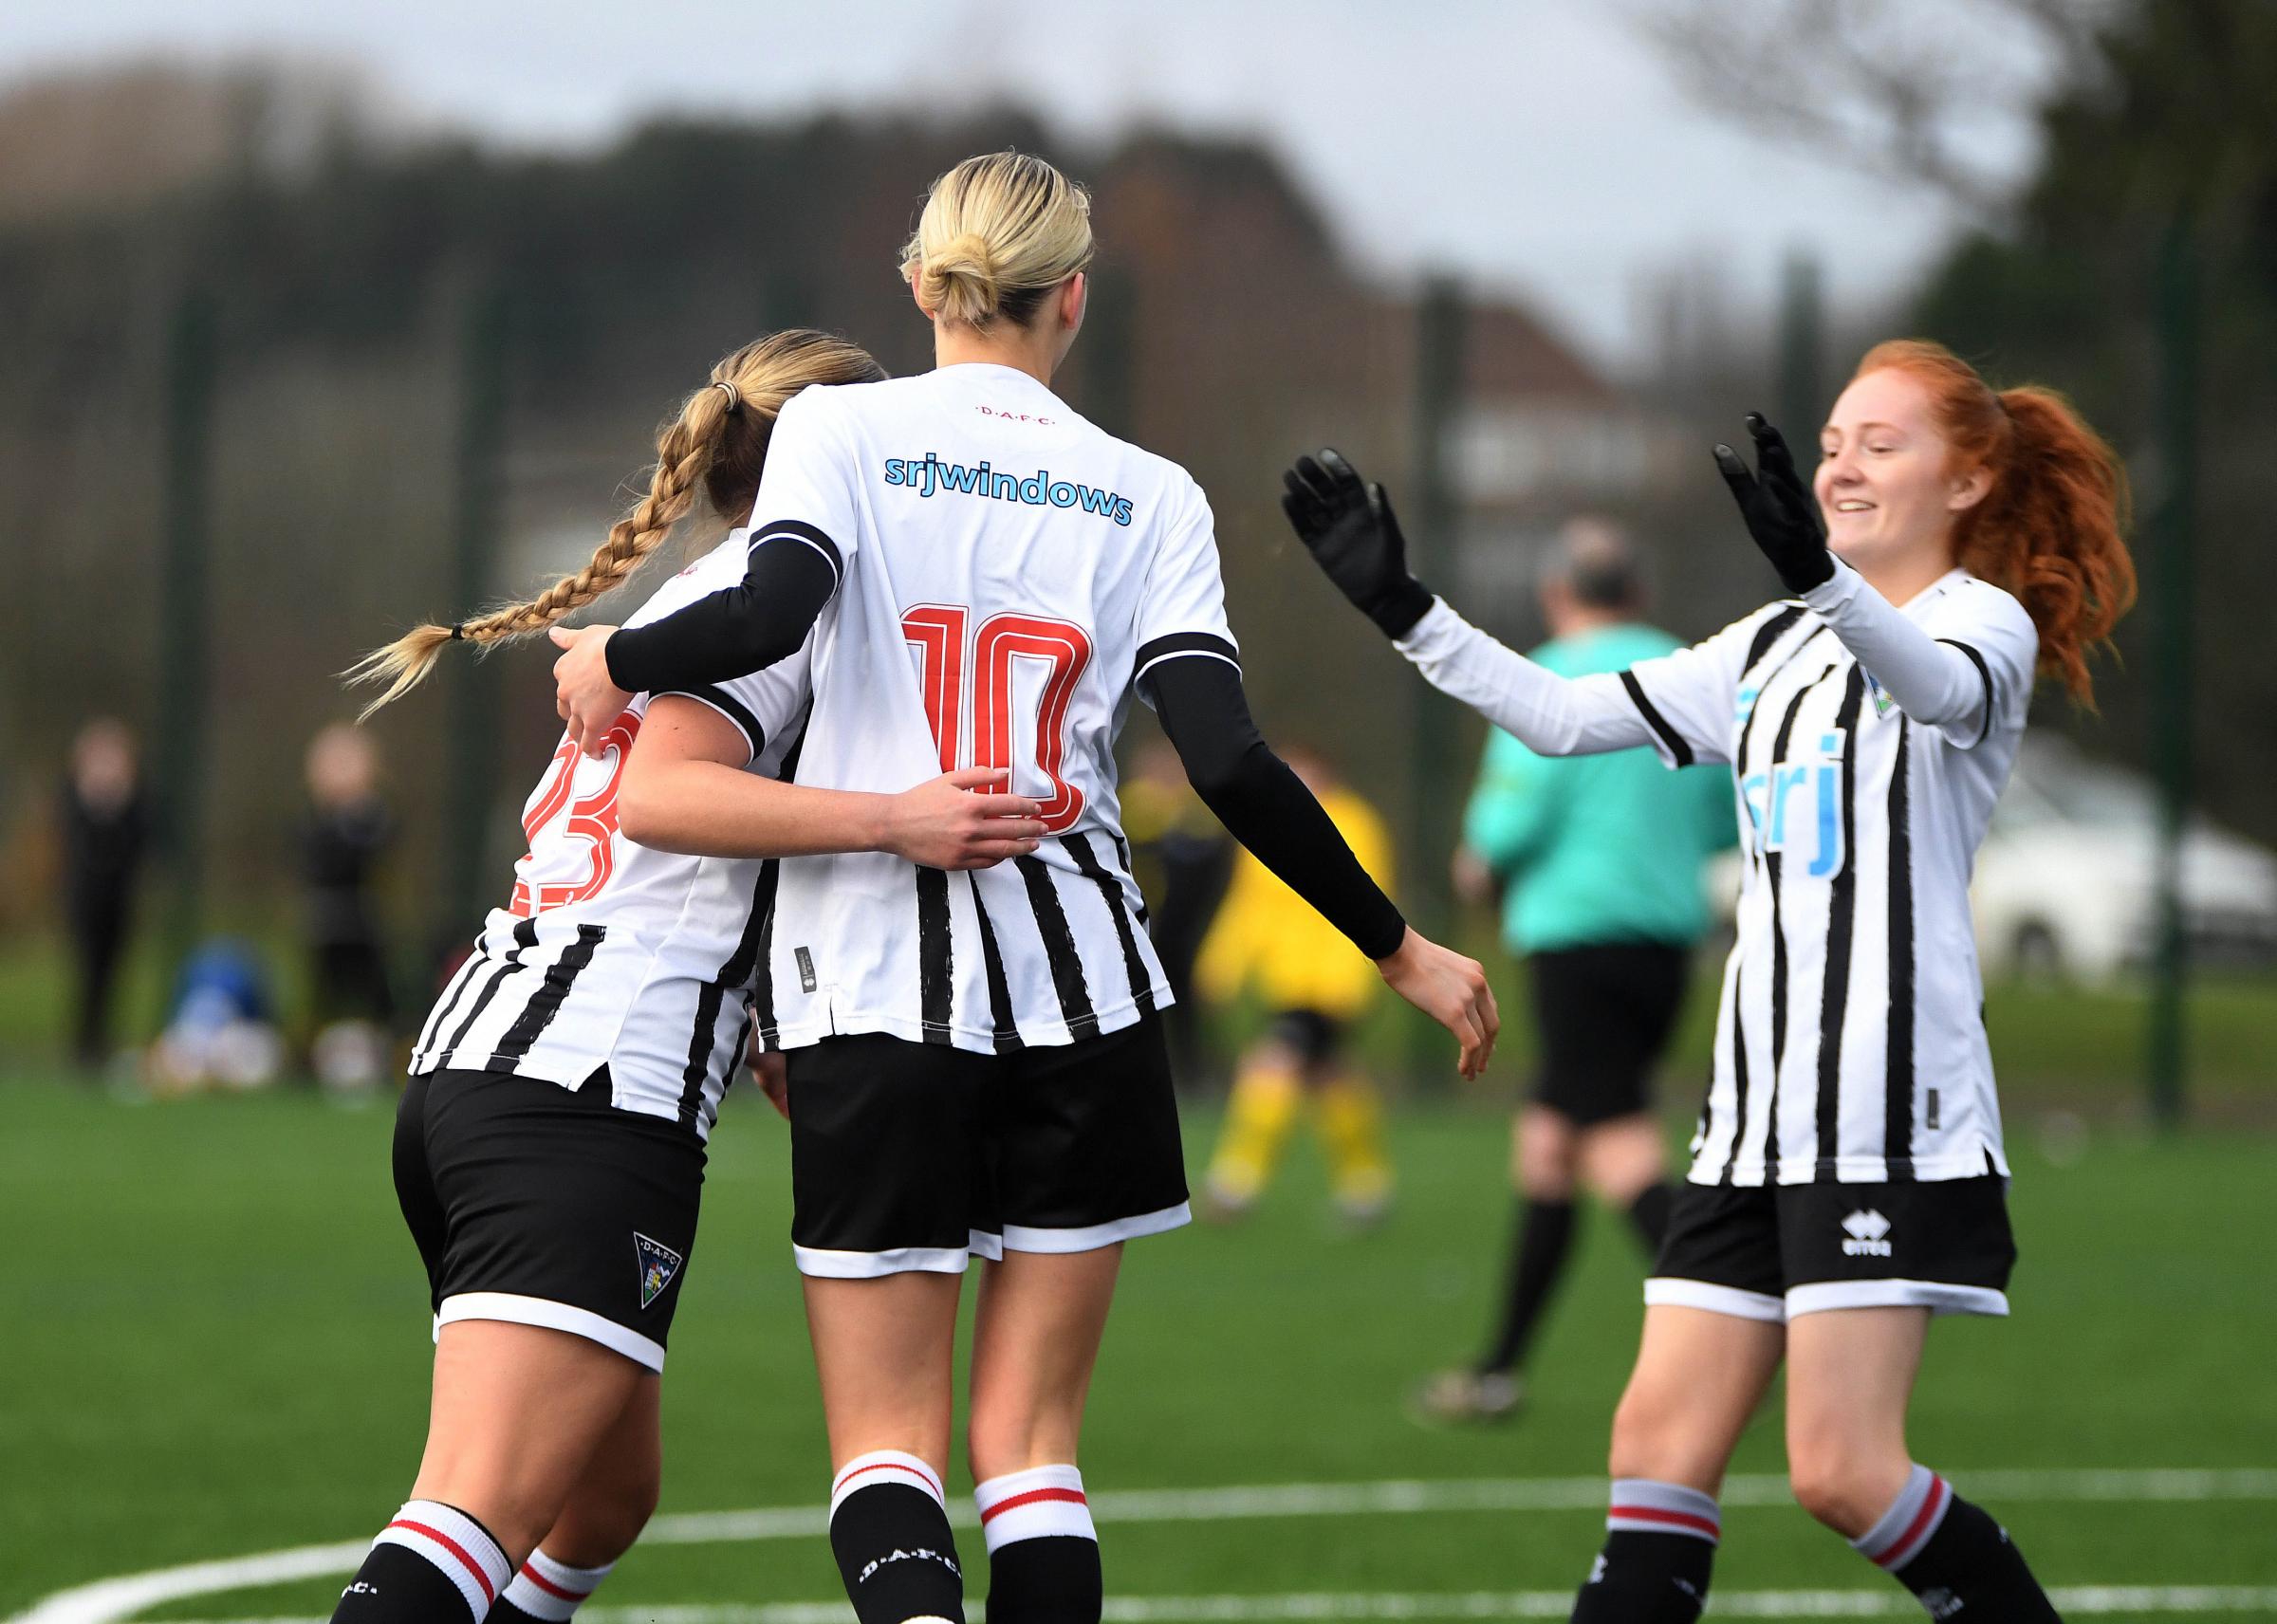 Dunfermline Athletic Ladies hit six to win at Murieston